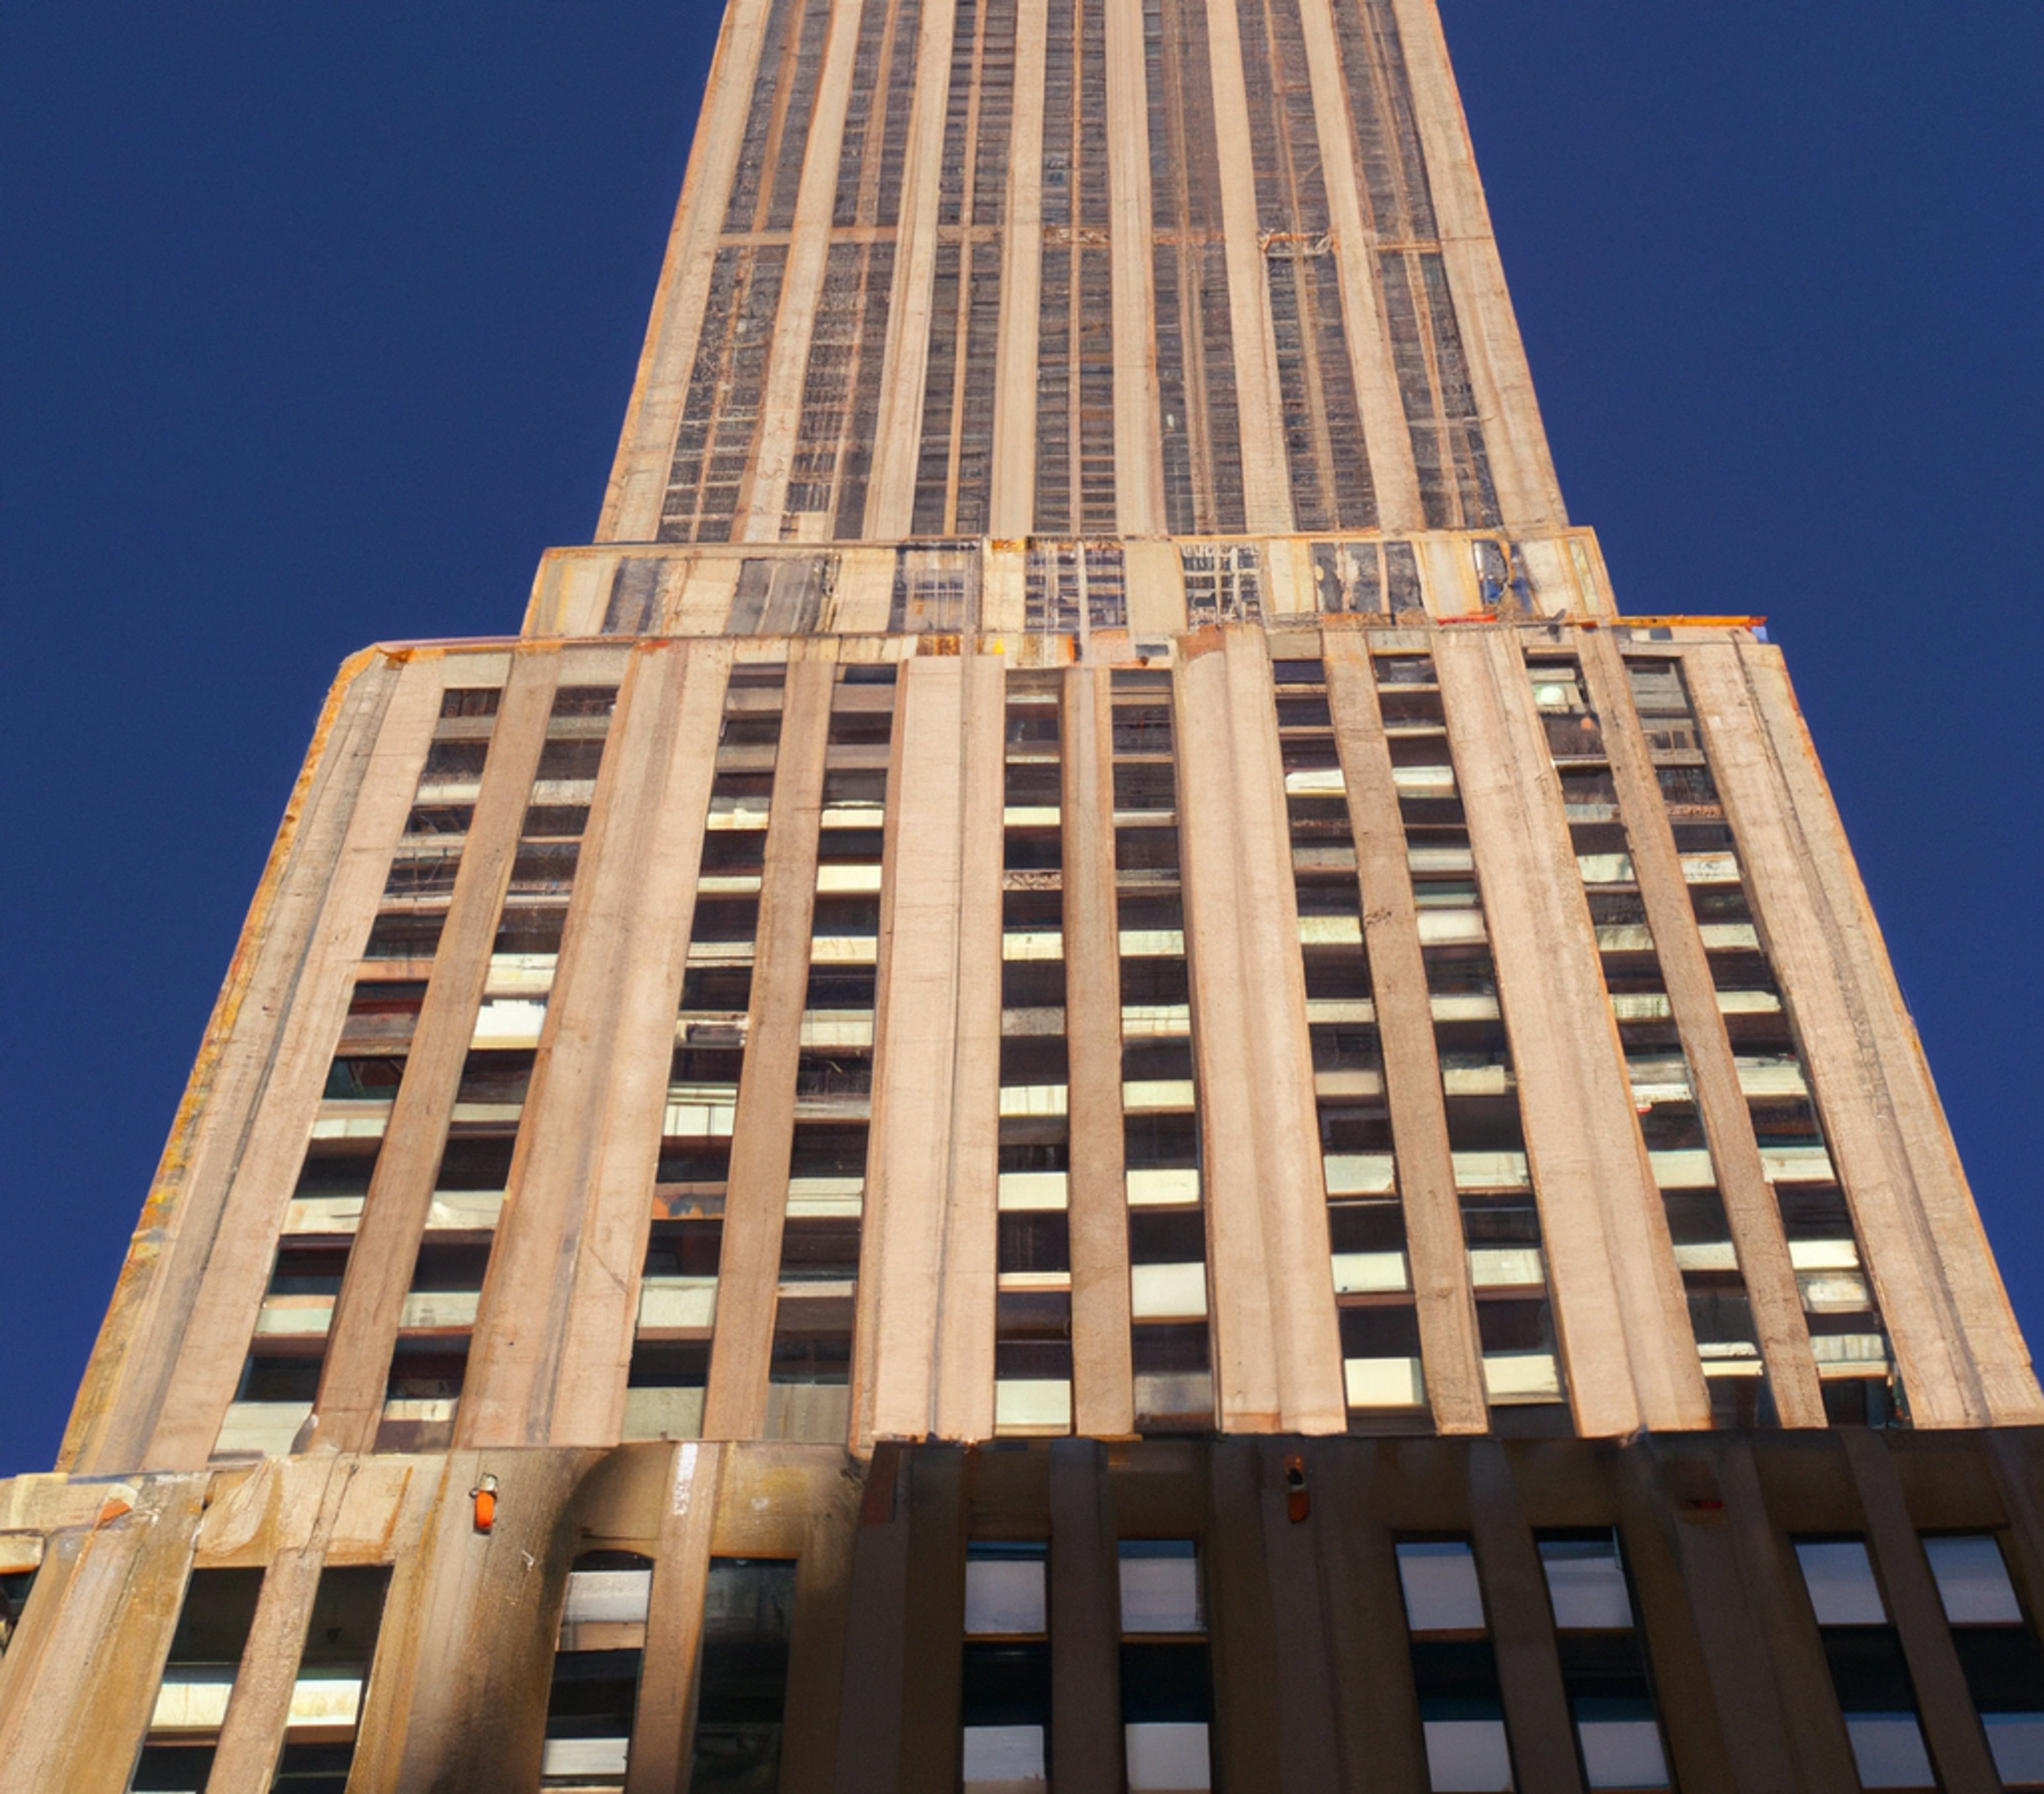 Guide to the Empire State Building's Dimensions (Height, Weight, and More)